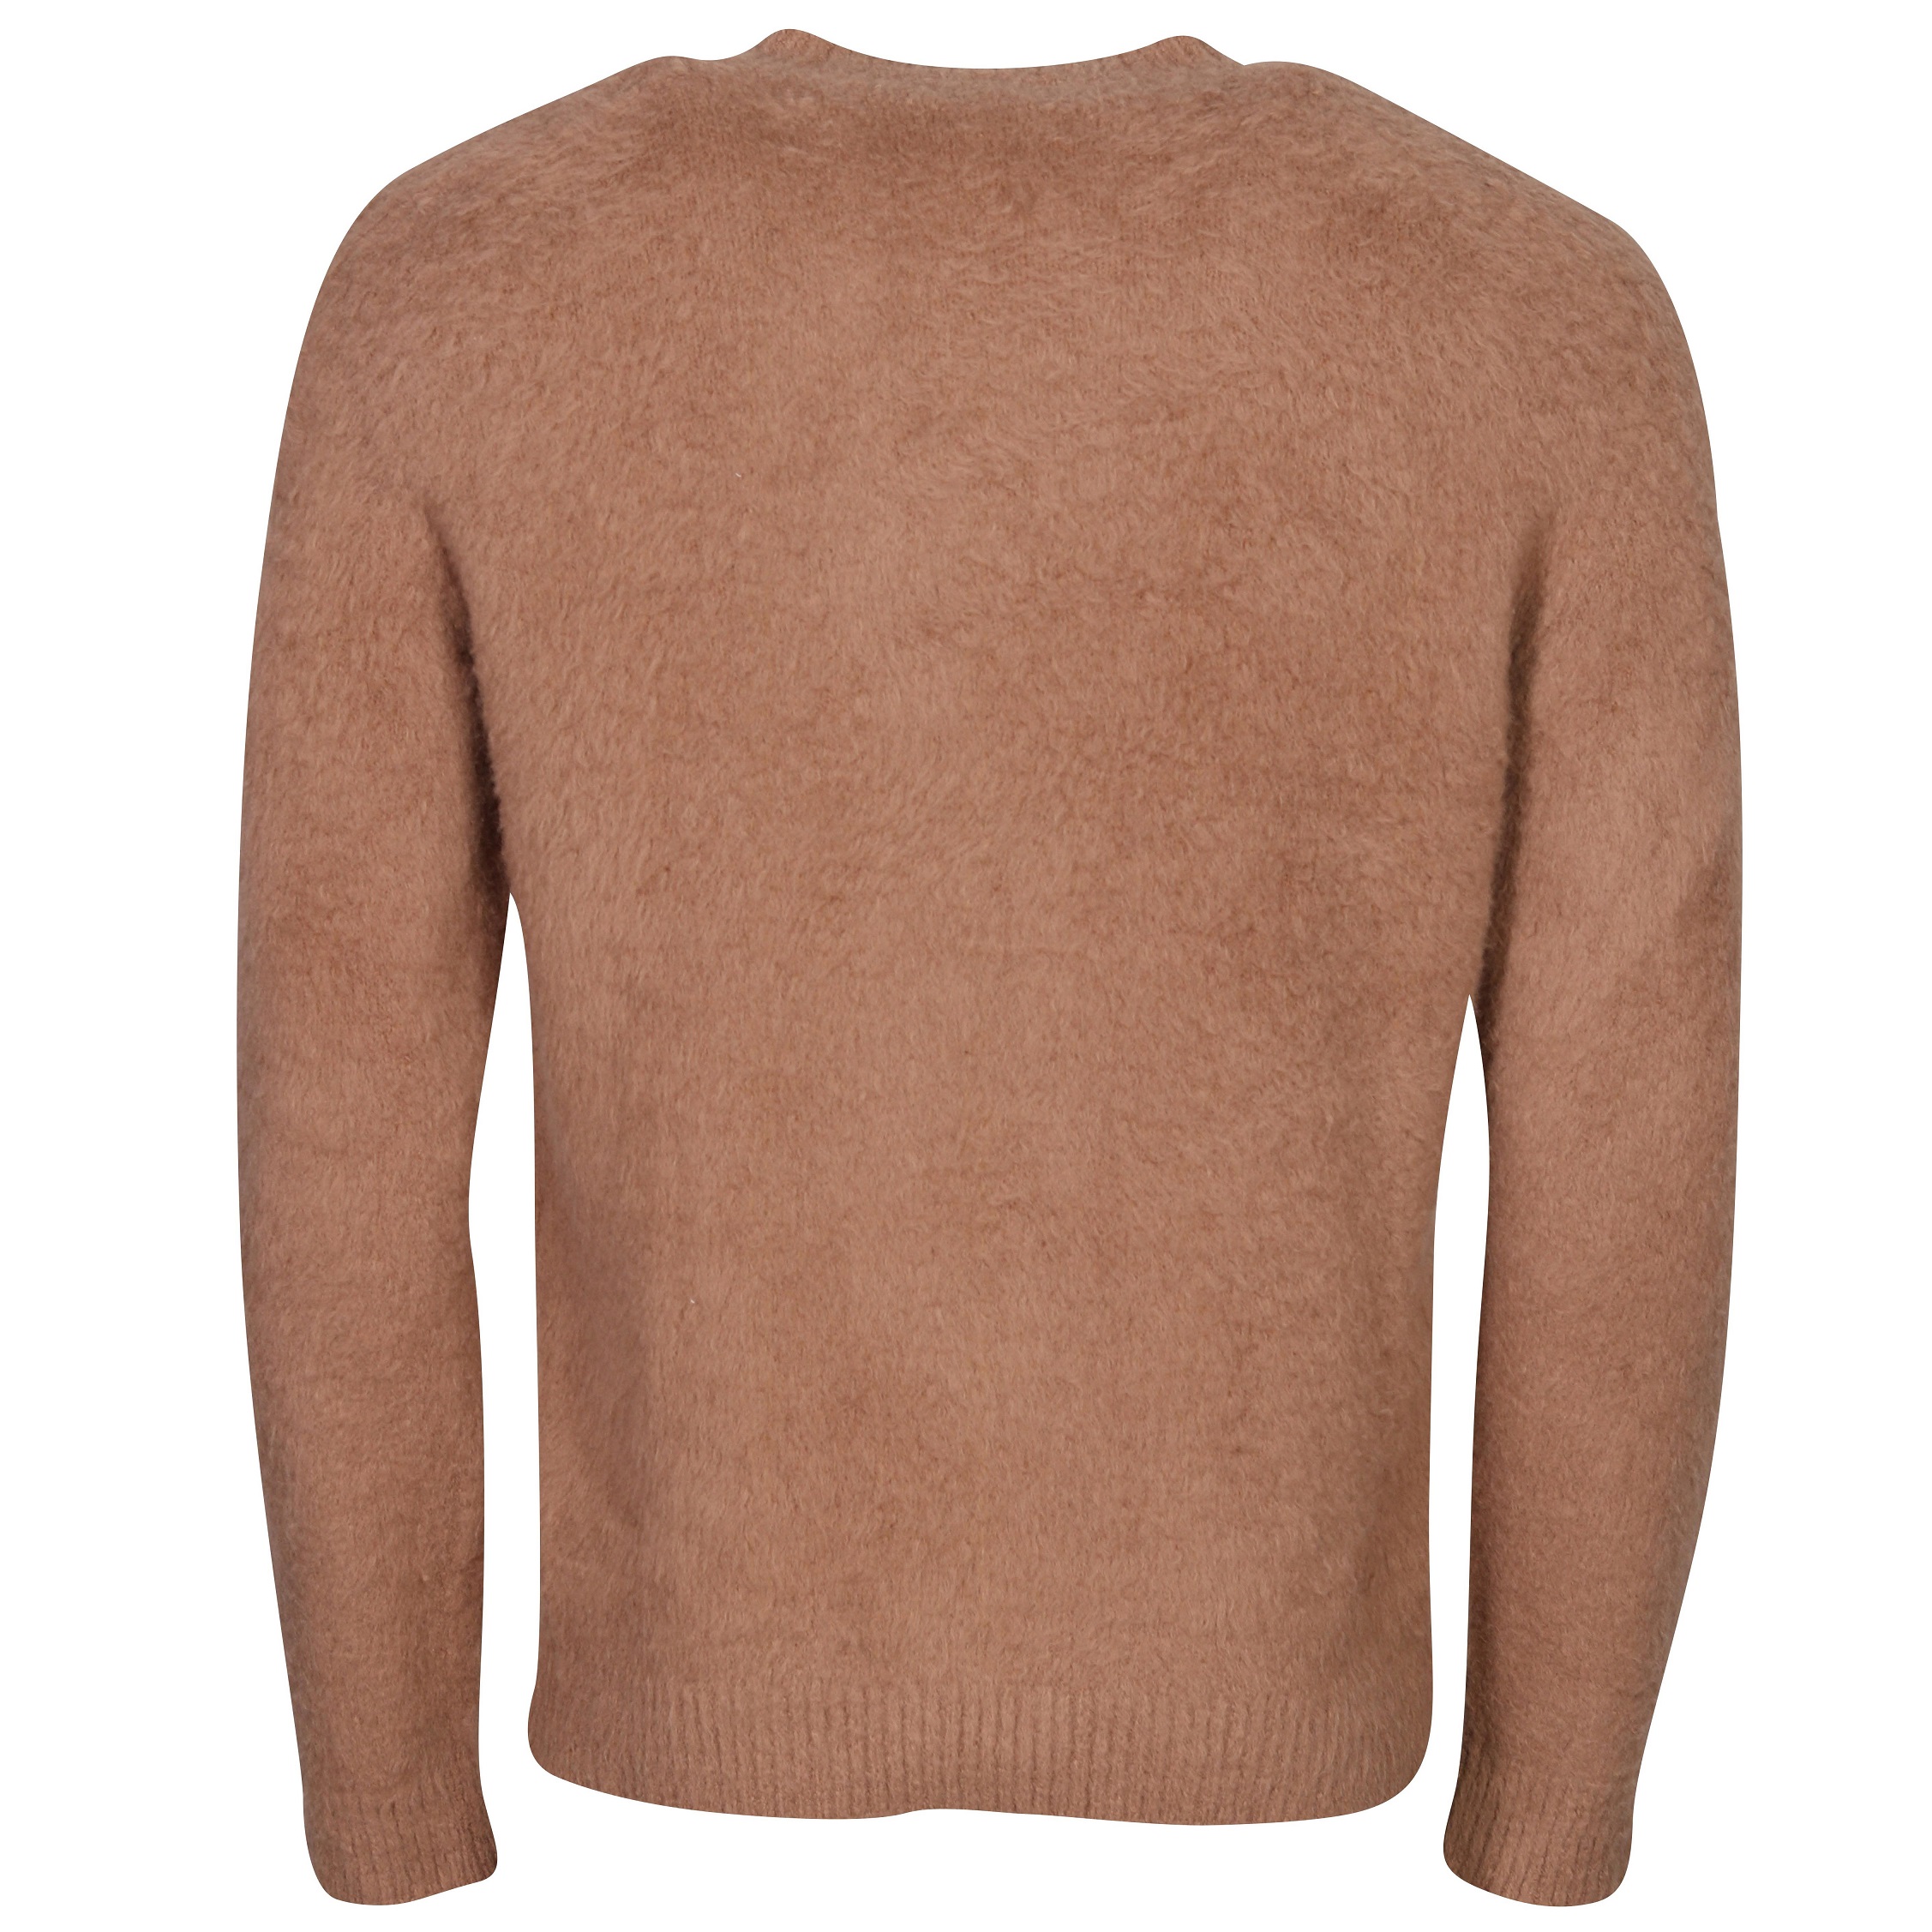 Roberto Collina Cotton Fluffy Knit Pullover in Camel 54